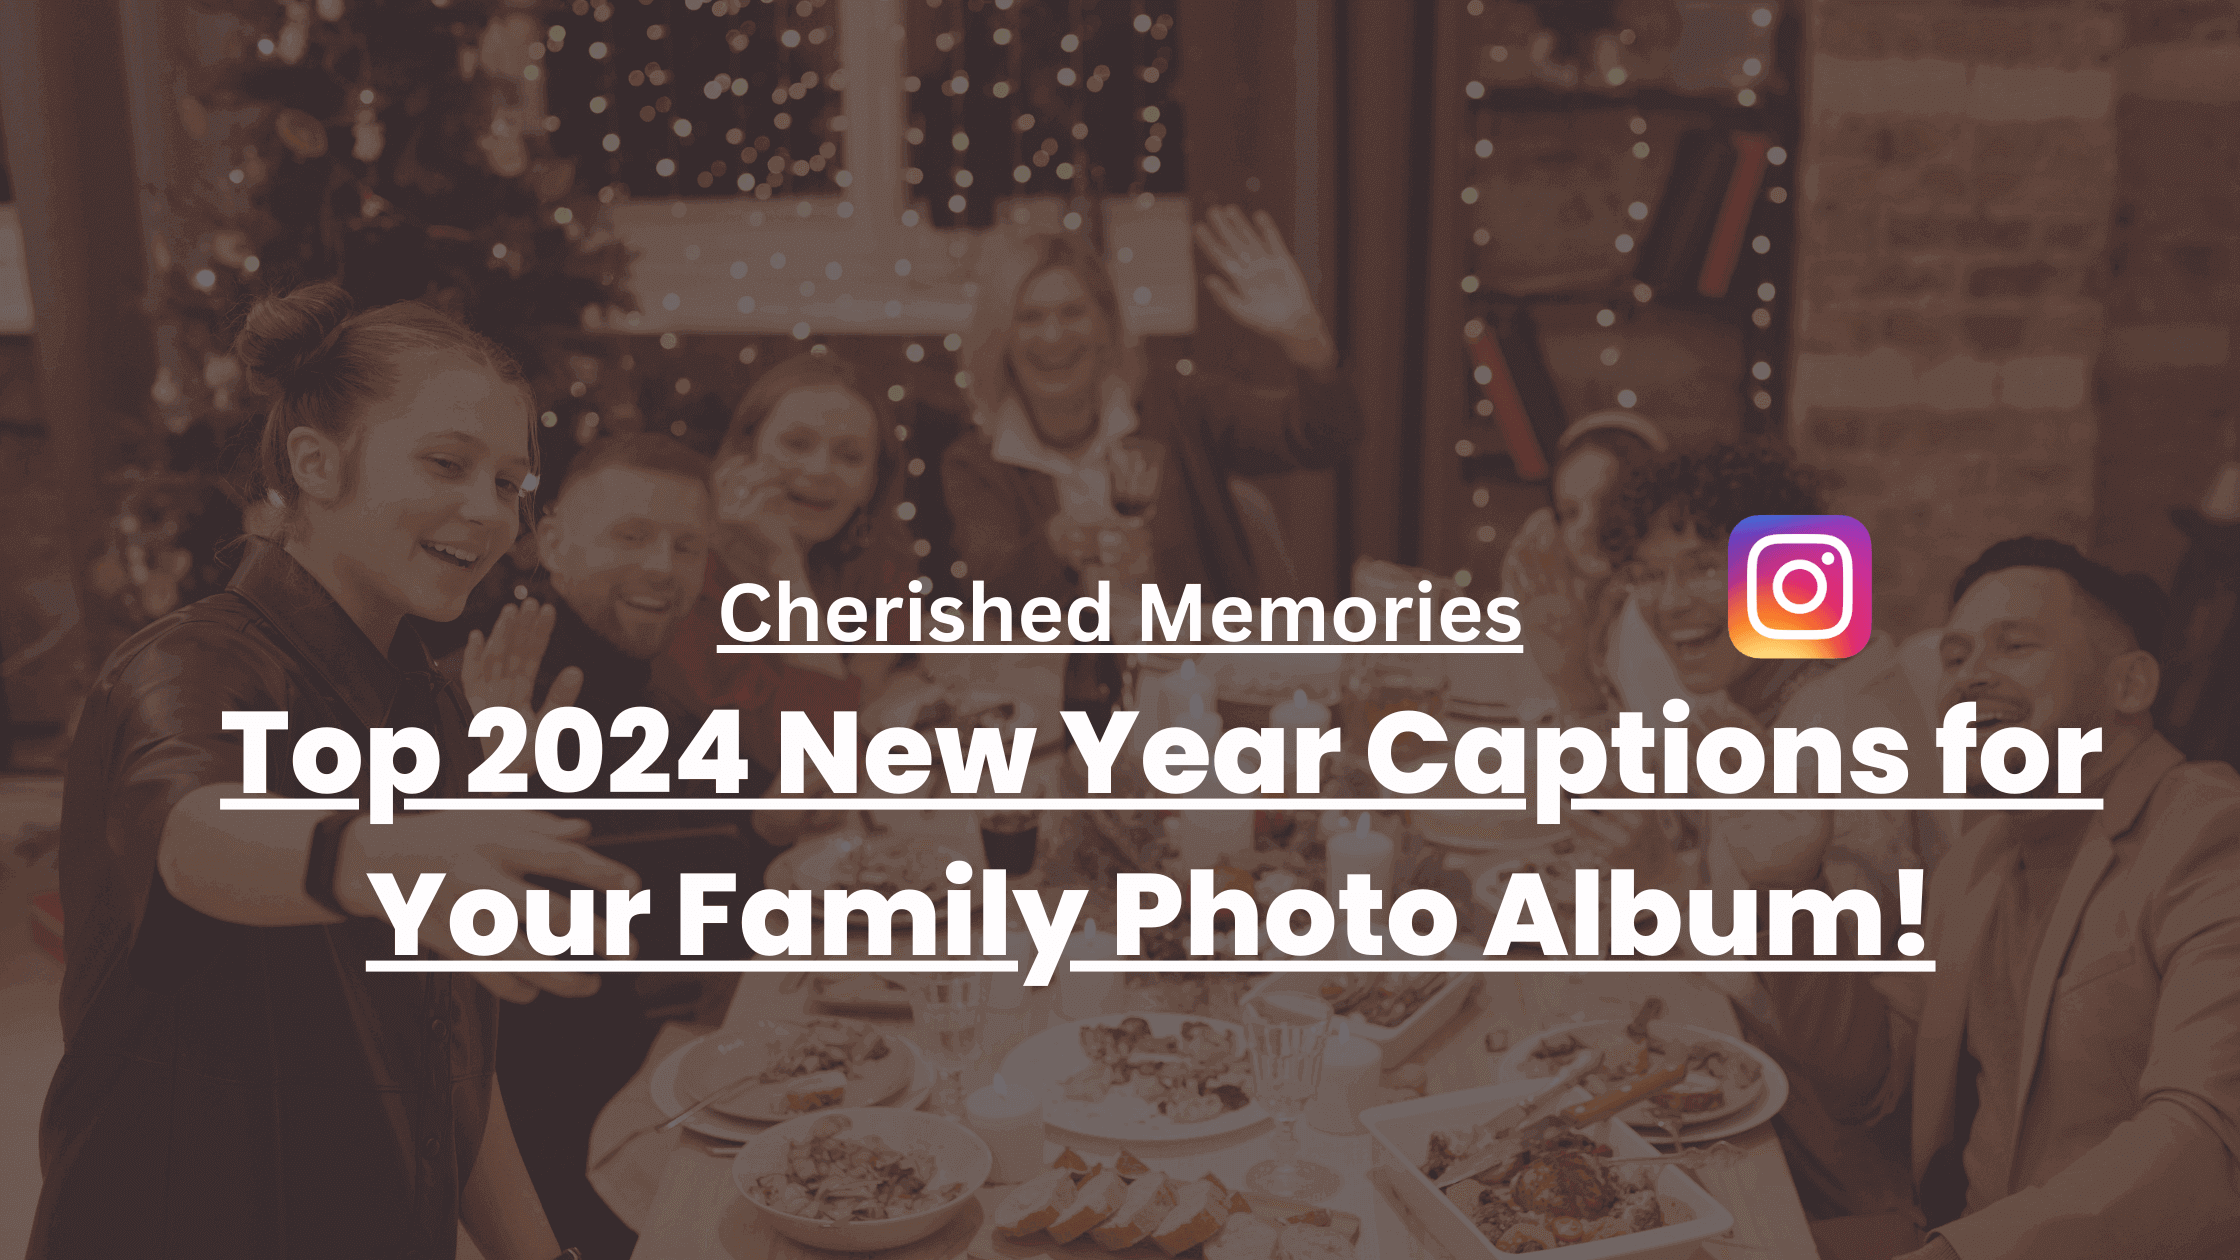 Cherished Memories: Top 2024 New Year Captions for Your Family Photo Album!